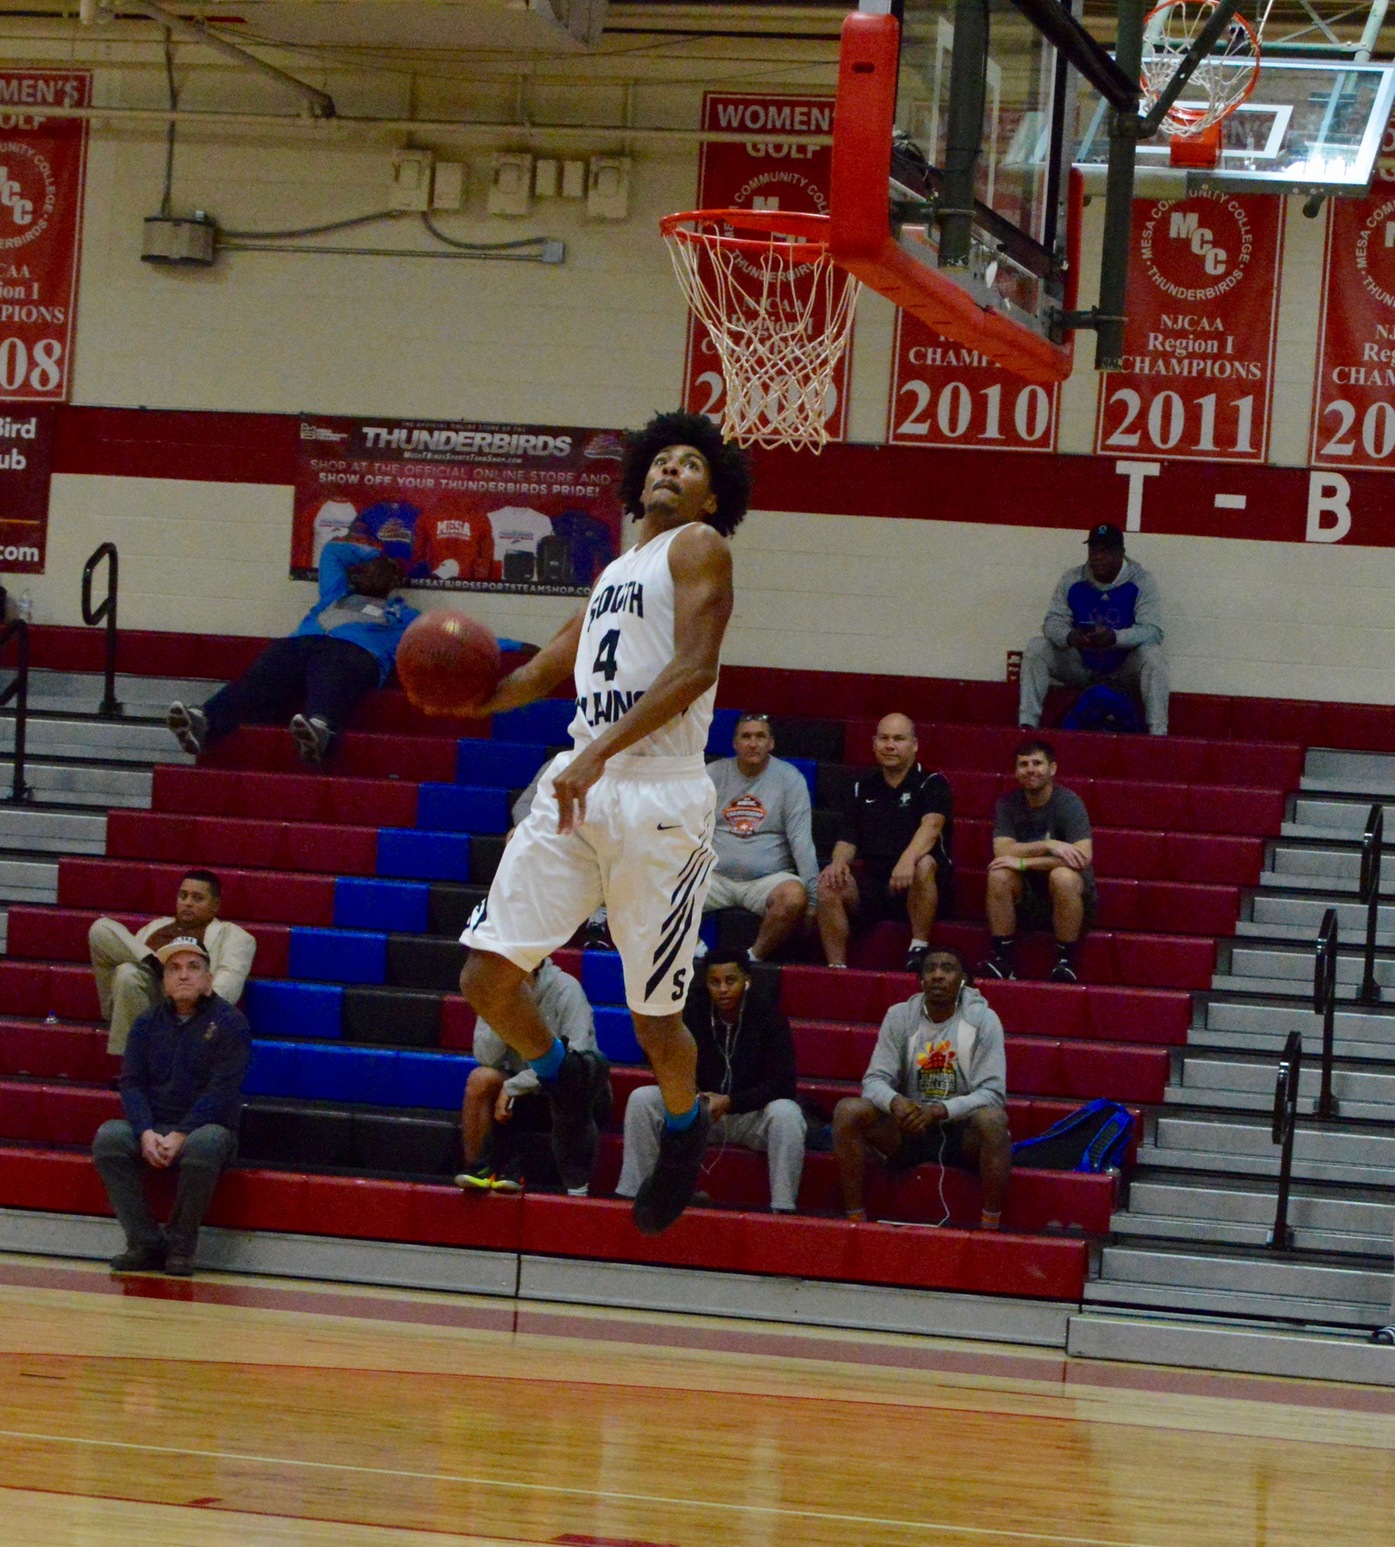 Top ranked Texans rout Benedictine JV 113-58 to improve to 11-0 on Wednesday